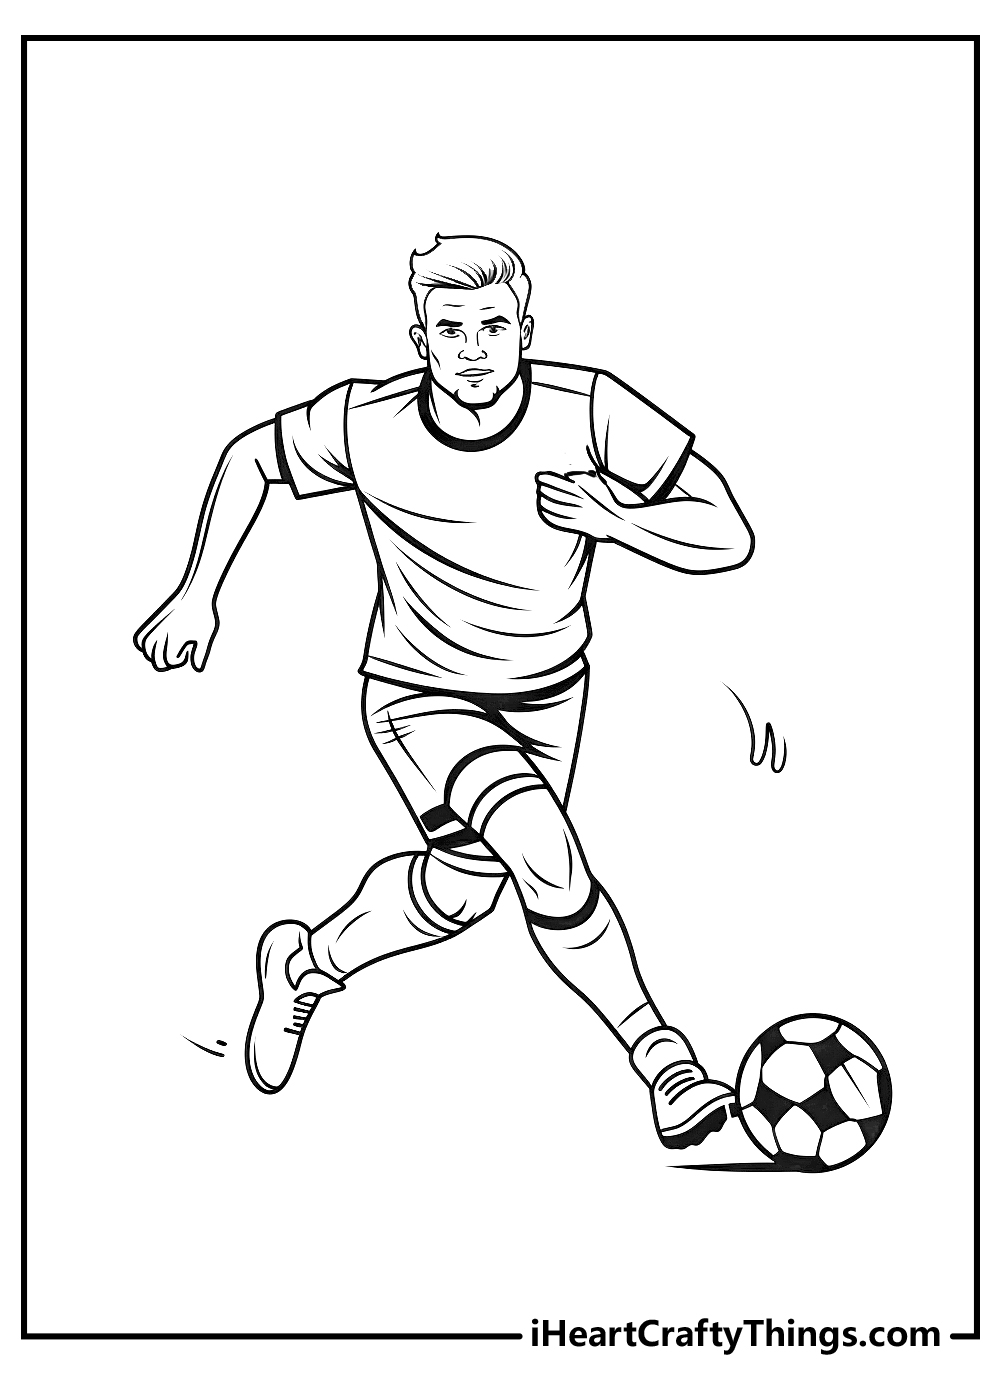 23+ Printable Soccer Coloring Pages